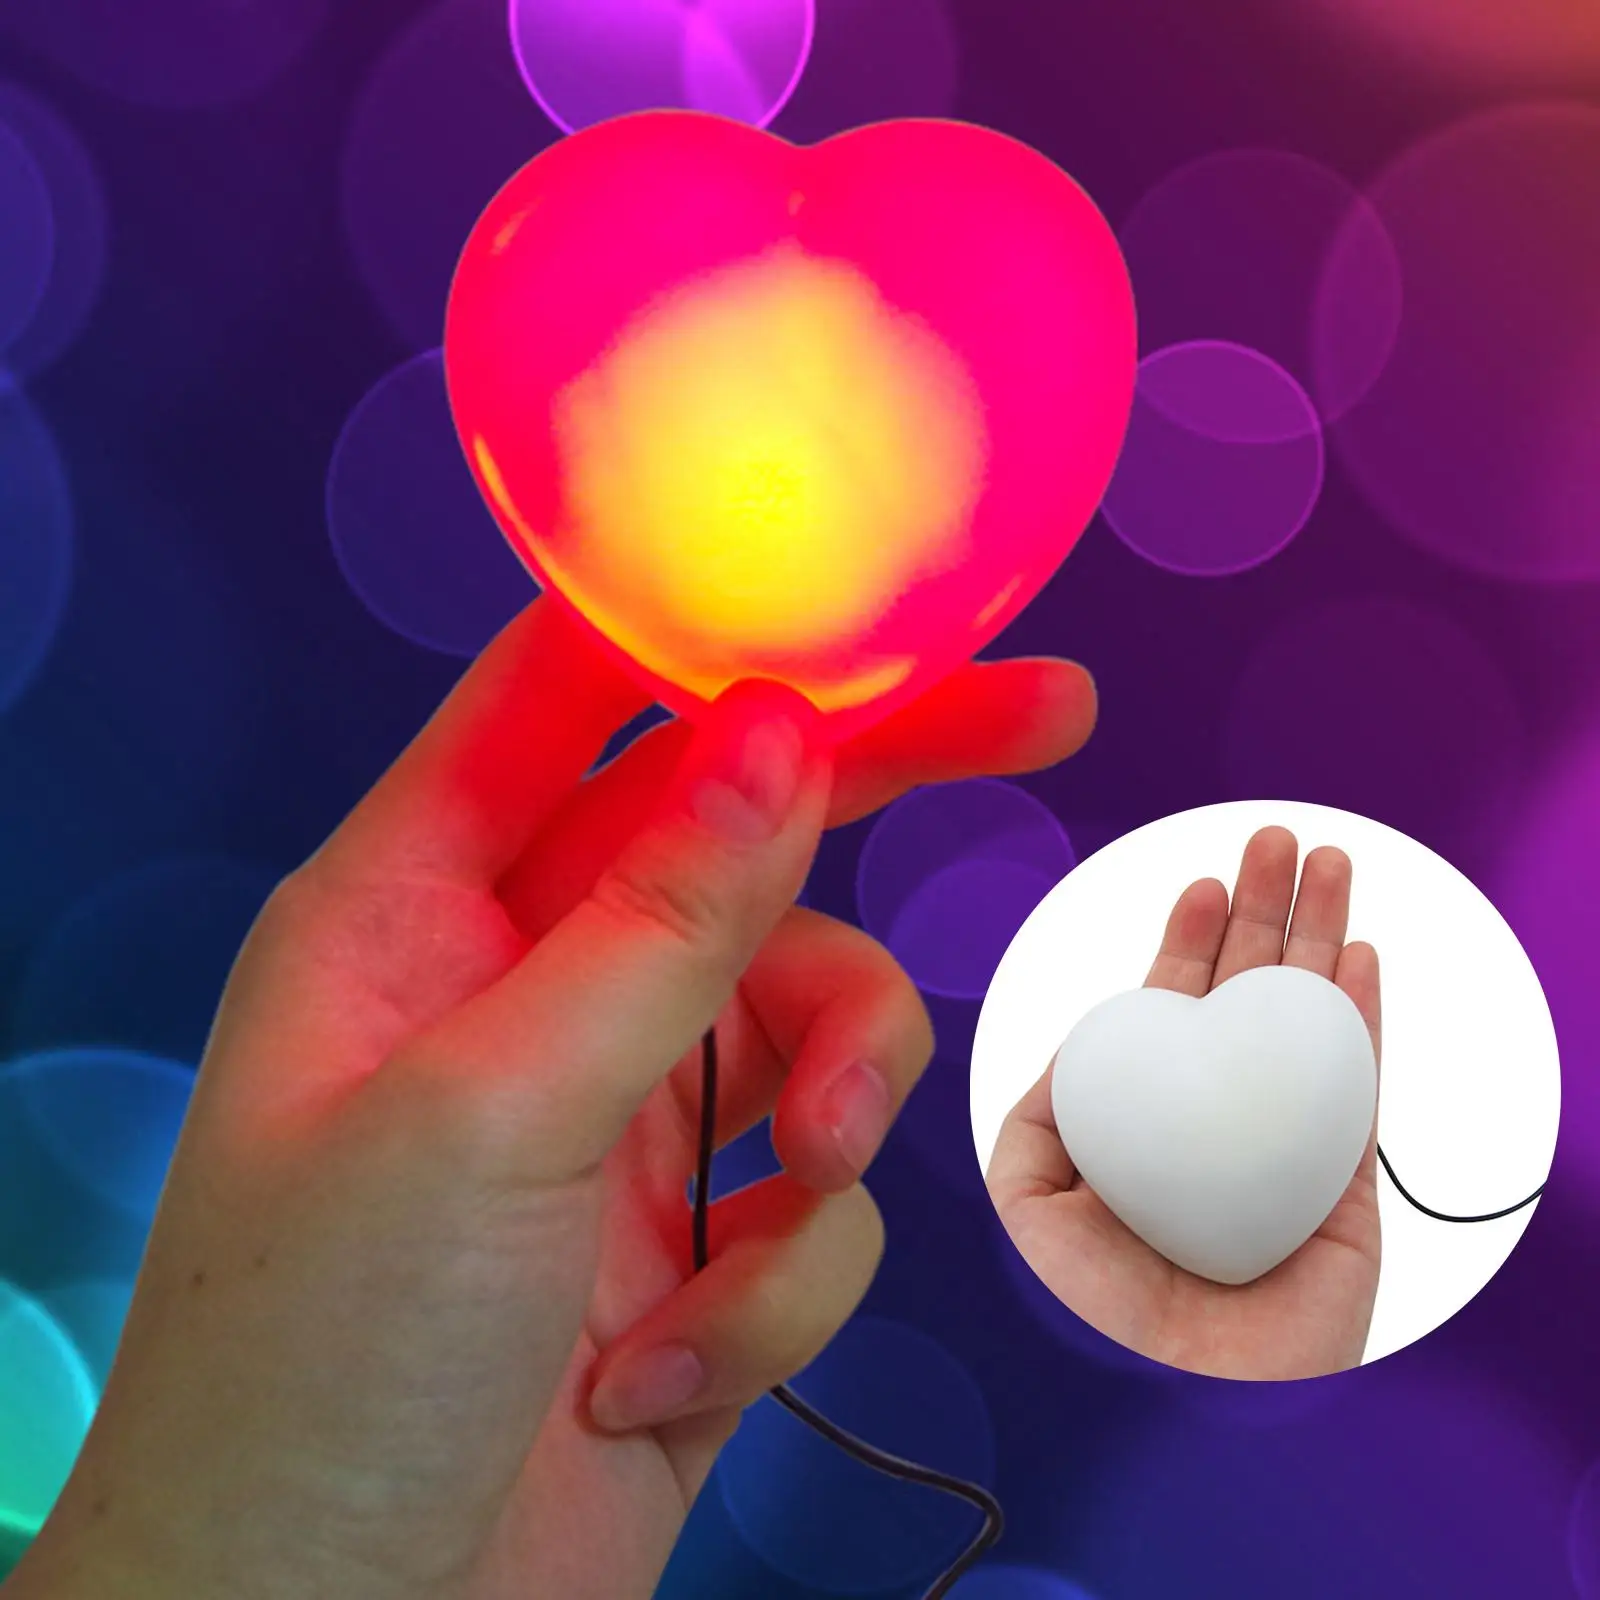 Heart Shaped Light On Chest Comedy Accessories Chest Love Lamp Magic Lights Tricks Chest Heart Shaped for Party